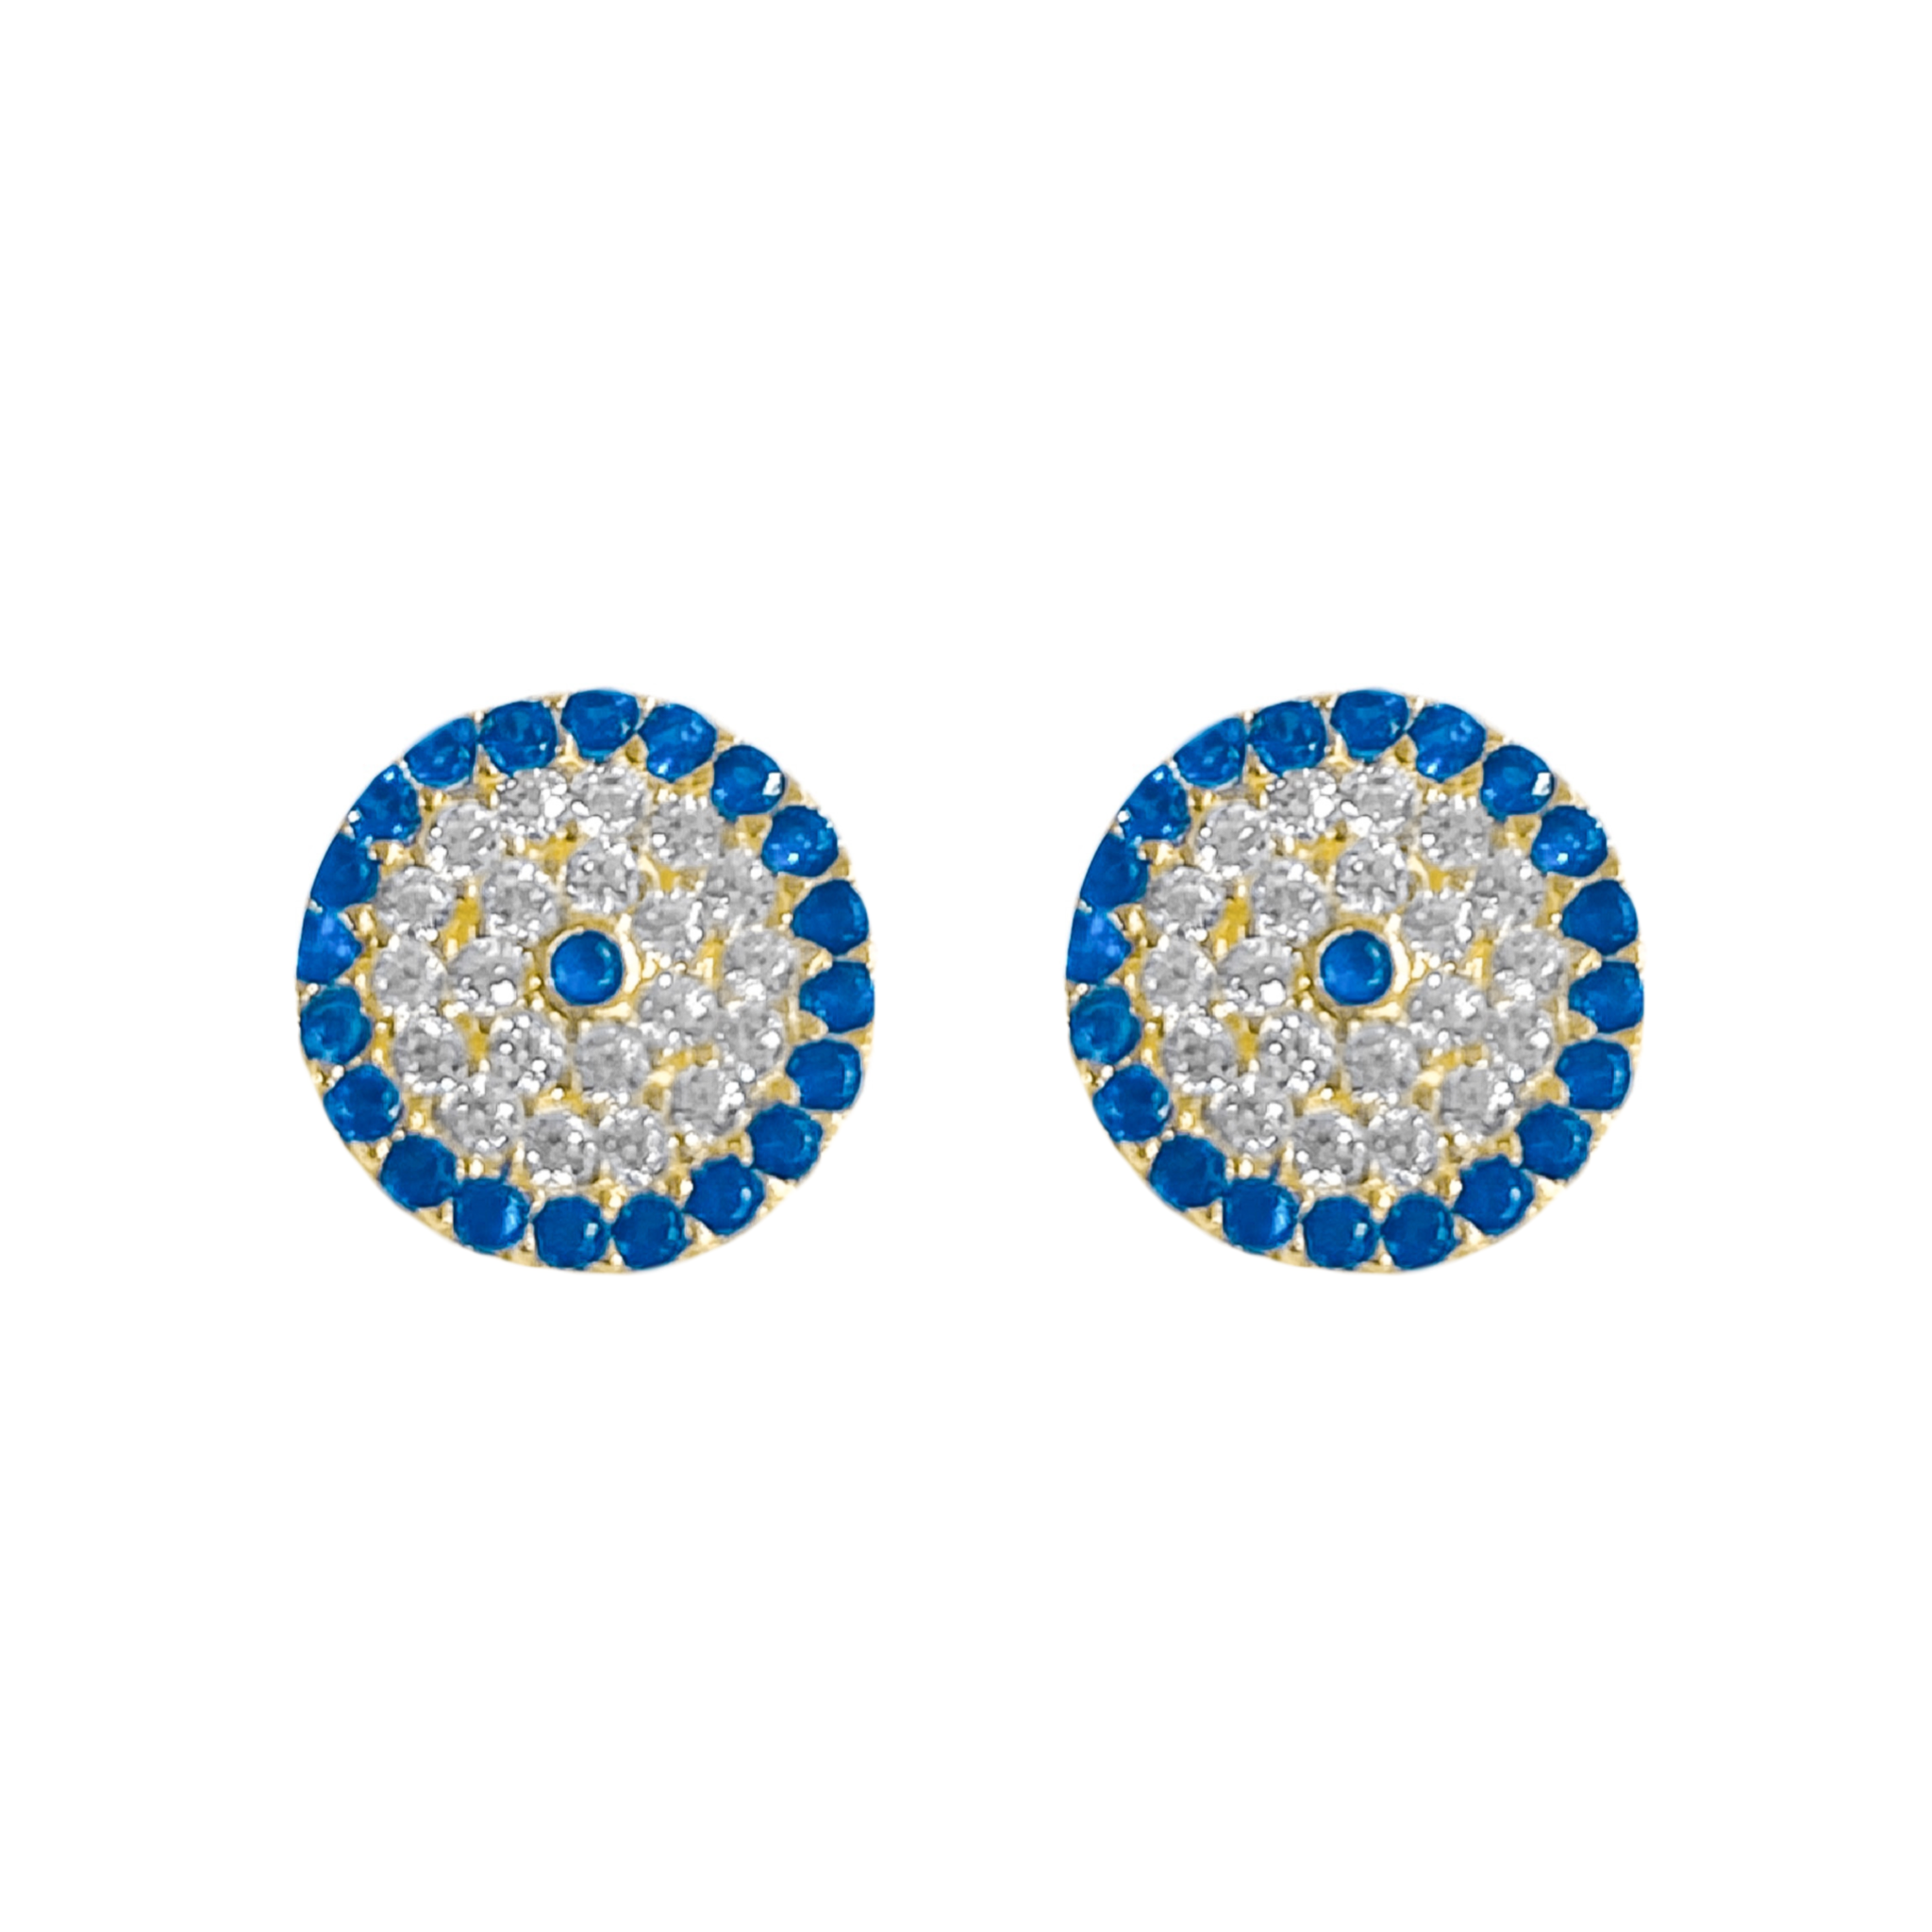 14K YELLOW GOLD ROUND PAVE BLUE EYE STUD EARRINGS